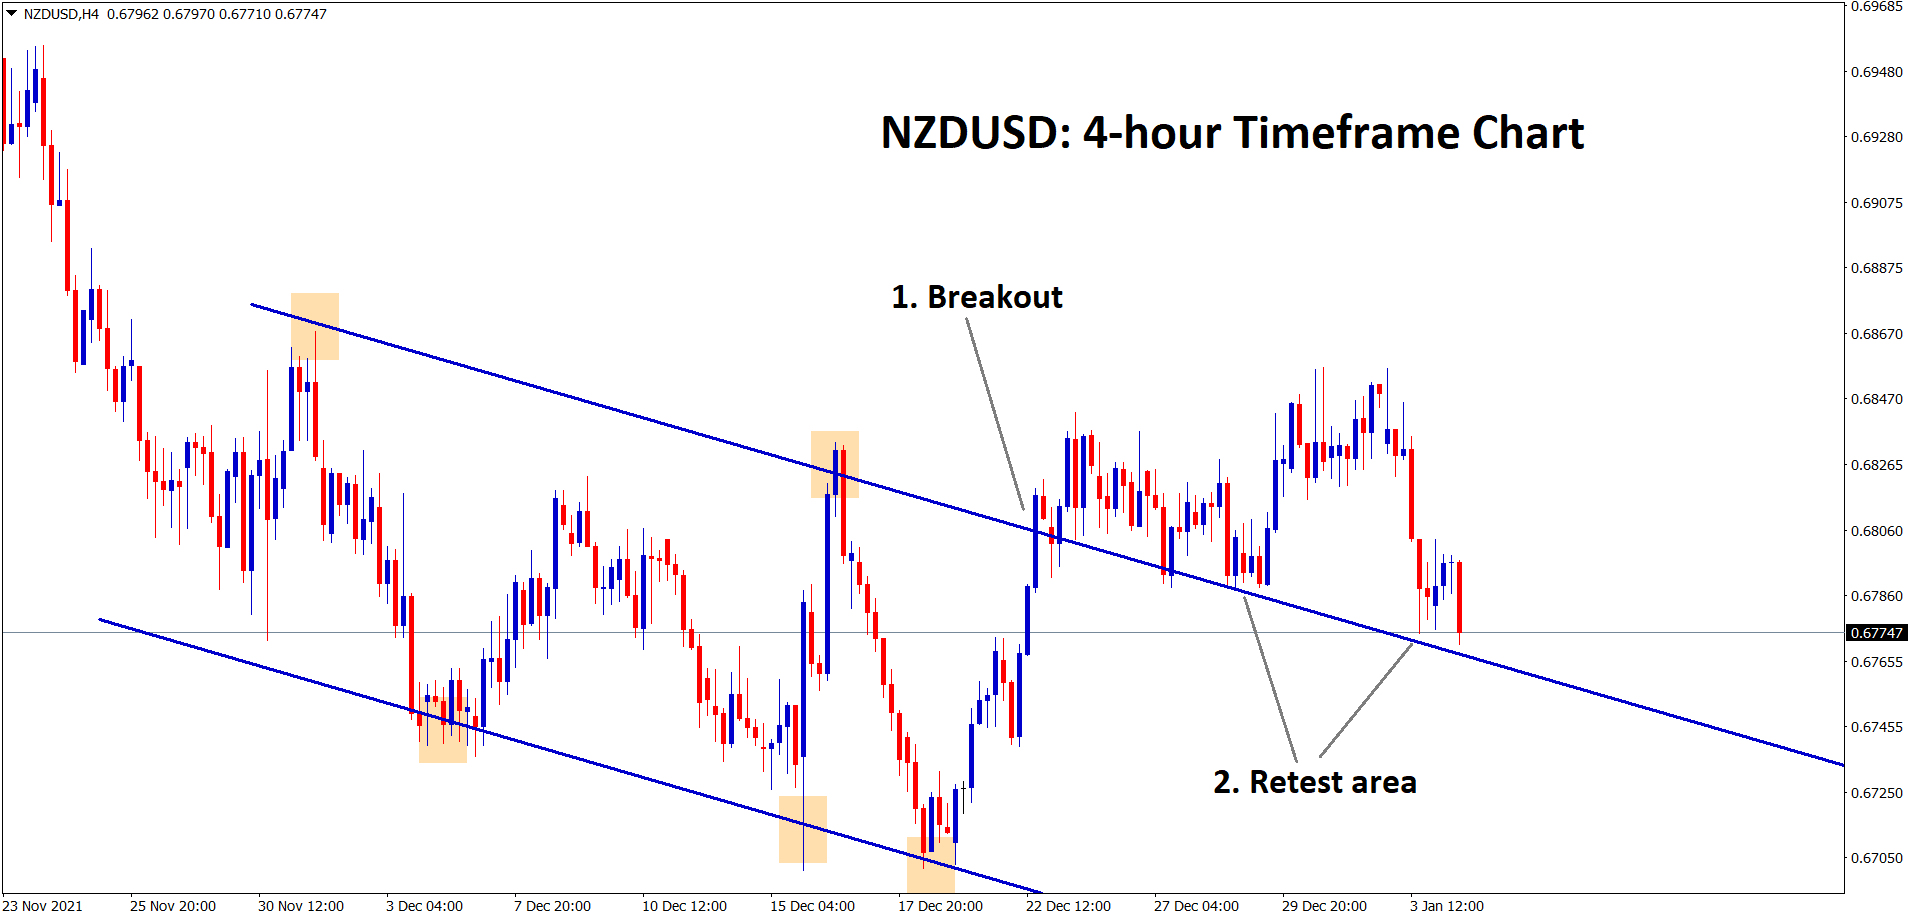 NZDUSD breakout and retest occur in the chart